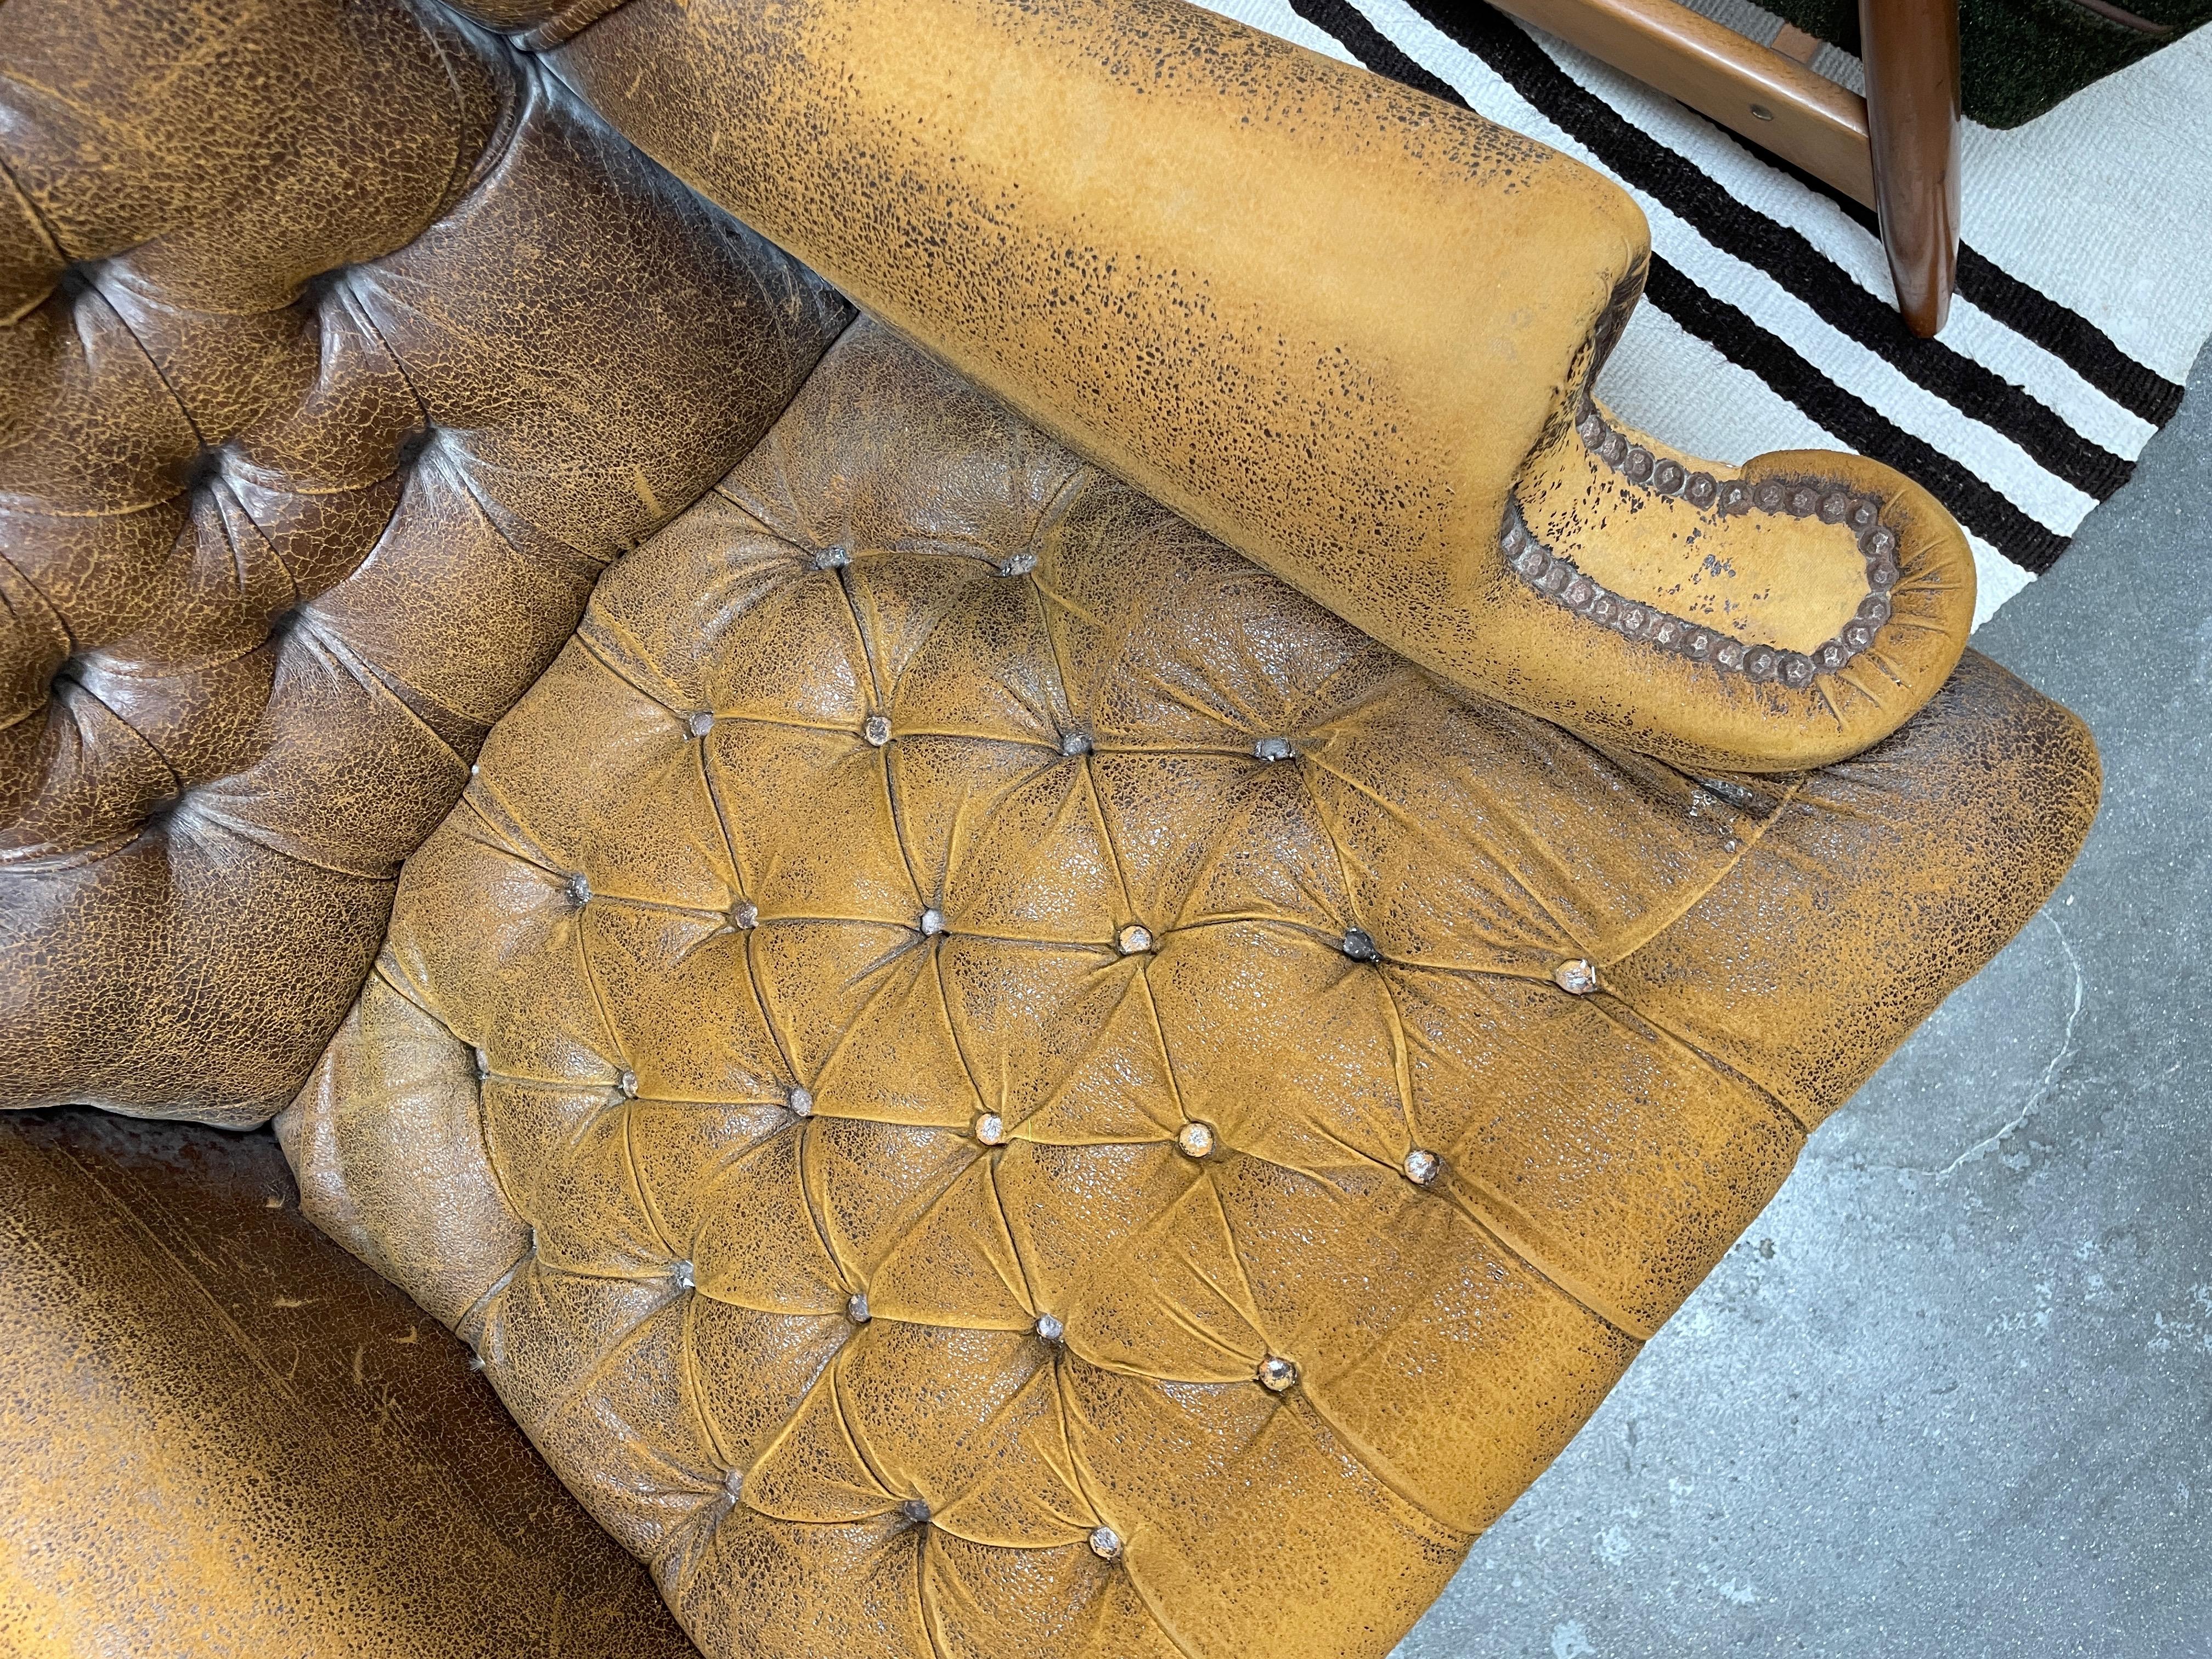 leather wingback chair for sale